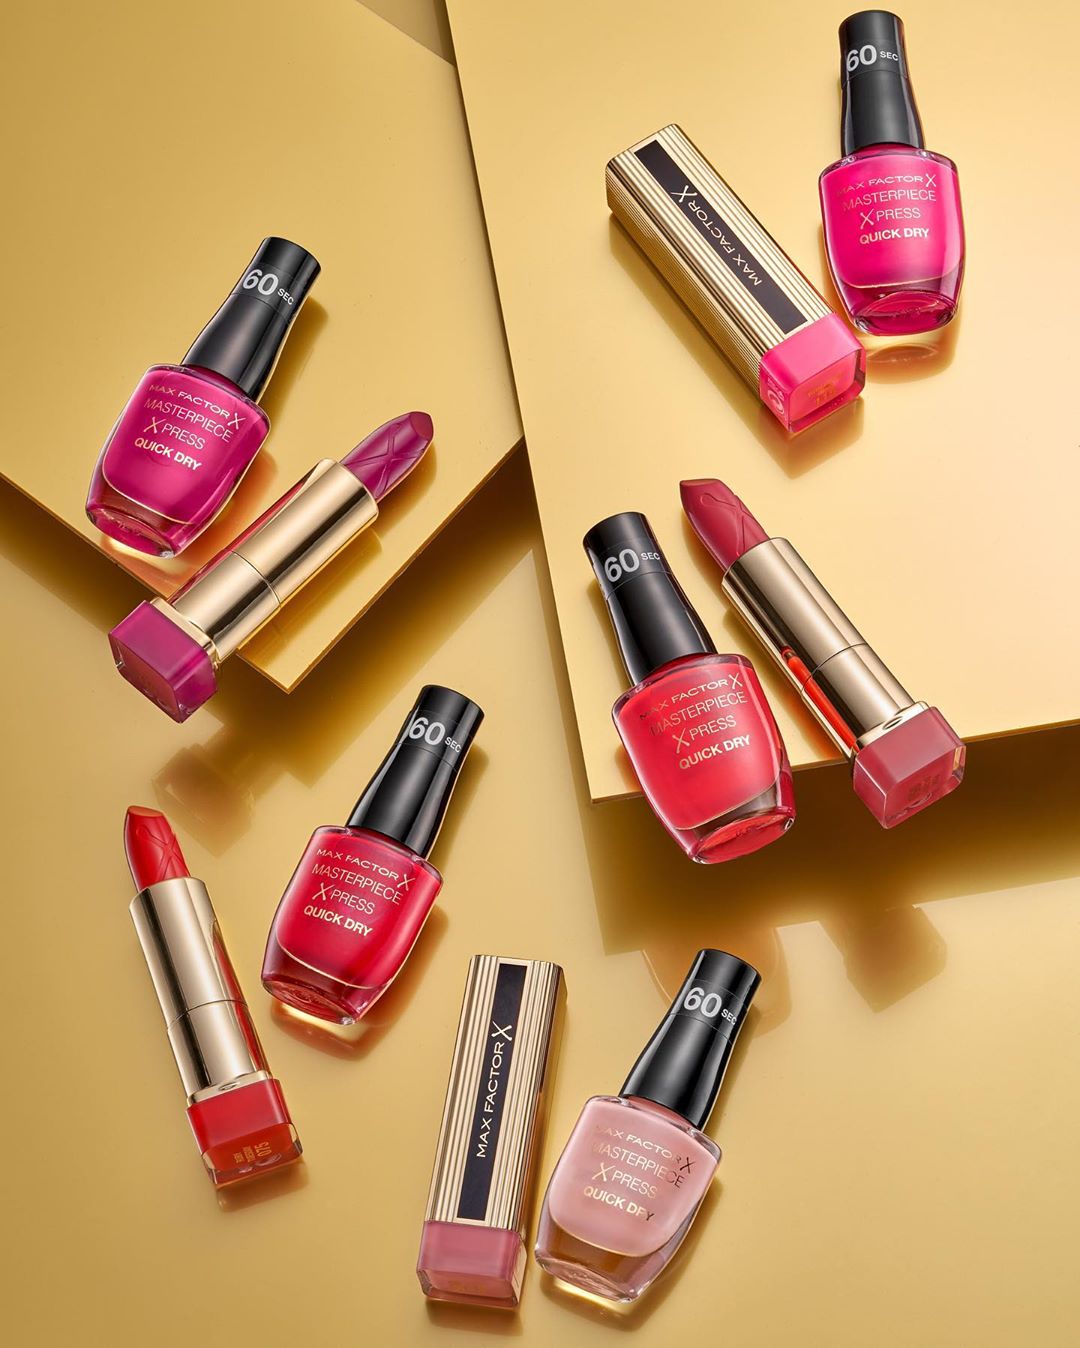 Max Factor - Match your lippy to your mani 💄
Complete your look with these killer combos :

(top left to bottom right) 
Masterpiece Xpress Berry Cute + Colour Elixir Rich Raspberry
Masterpiece Xpress...